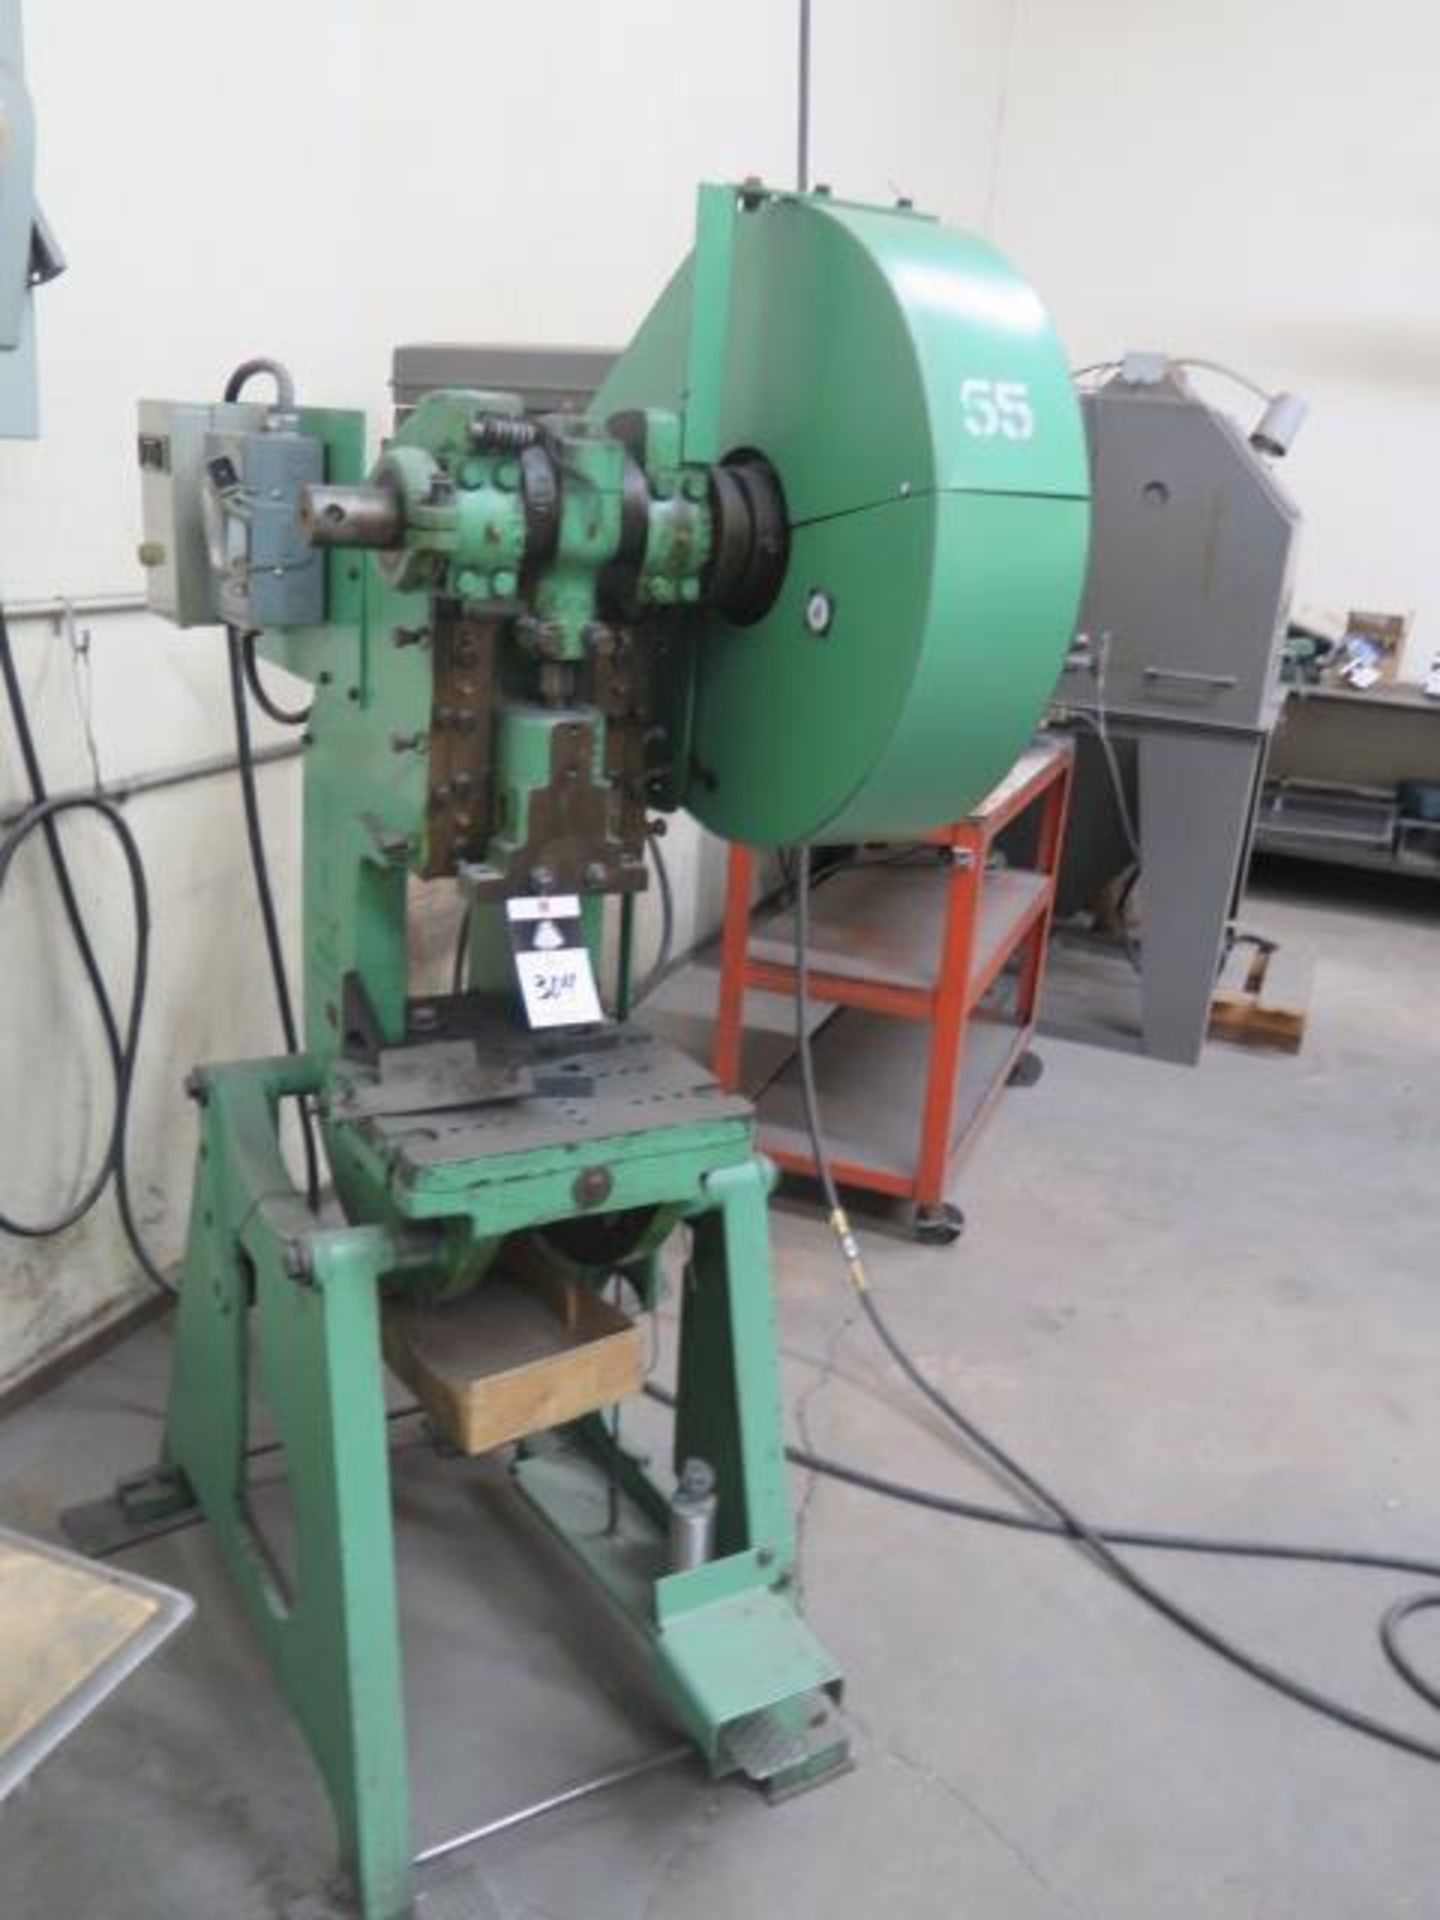 Benchmaster 253-MO OBI Stamping Press SOLD AS PARTS ONLY (SOLD AS-IS - NO WARRANTY - Image 3 of 8